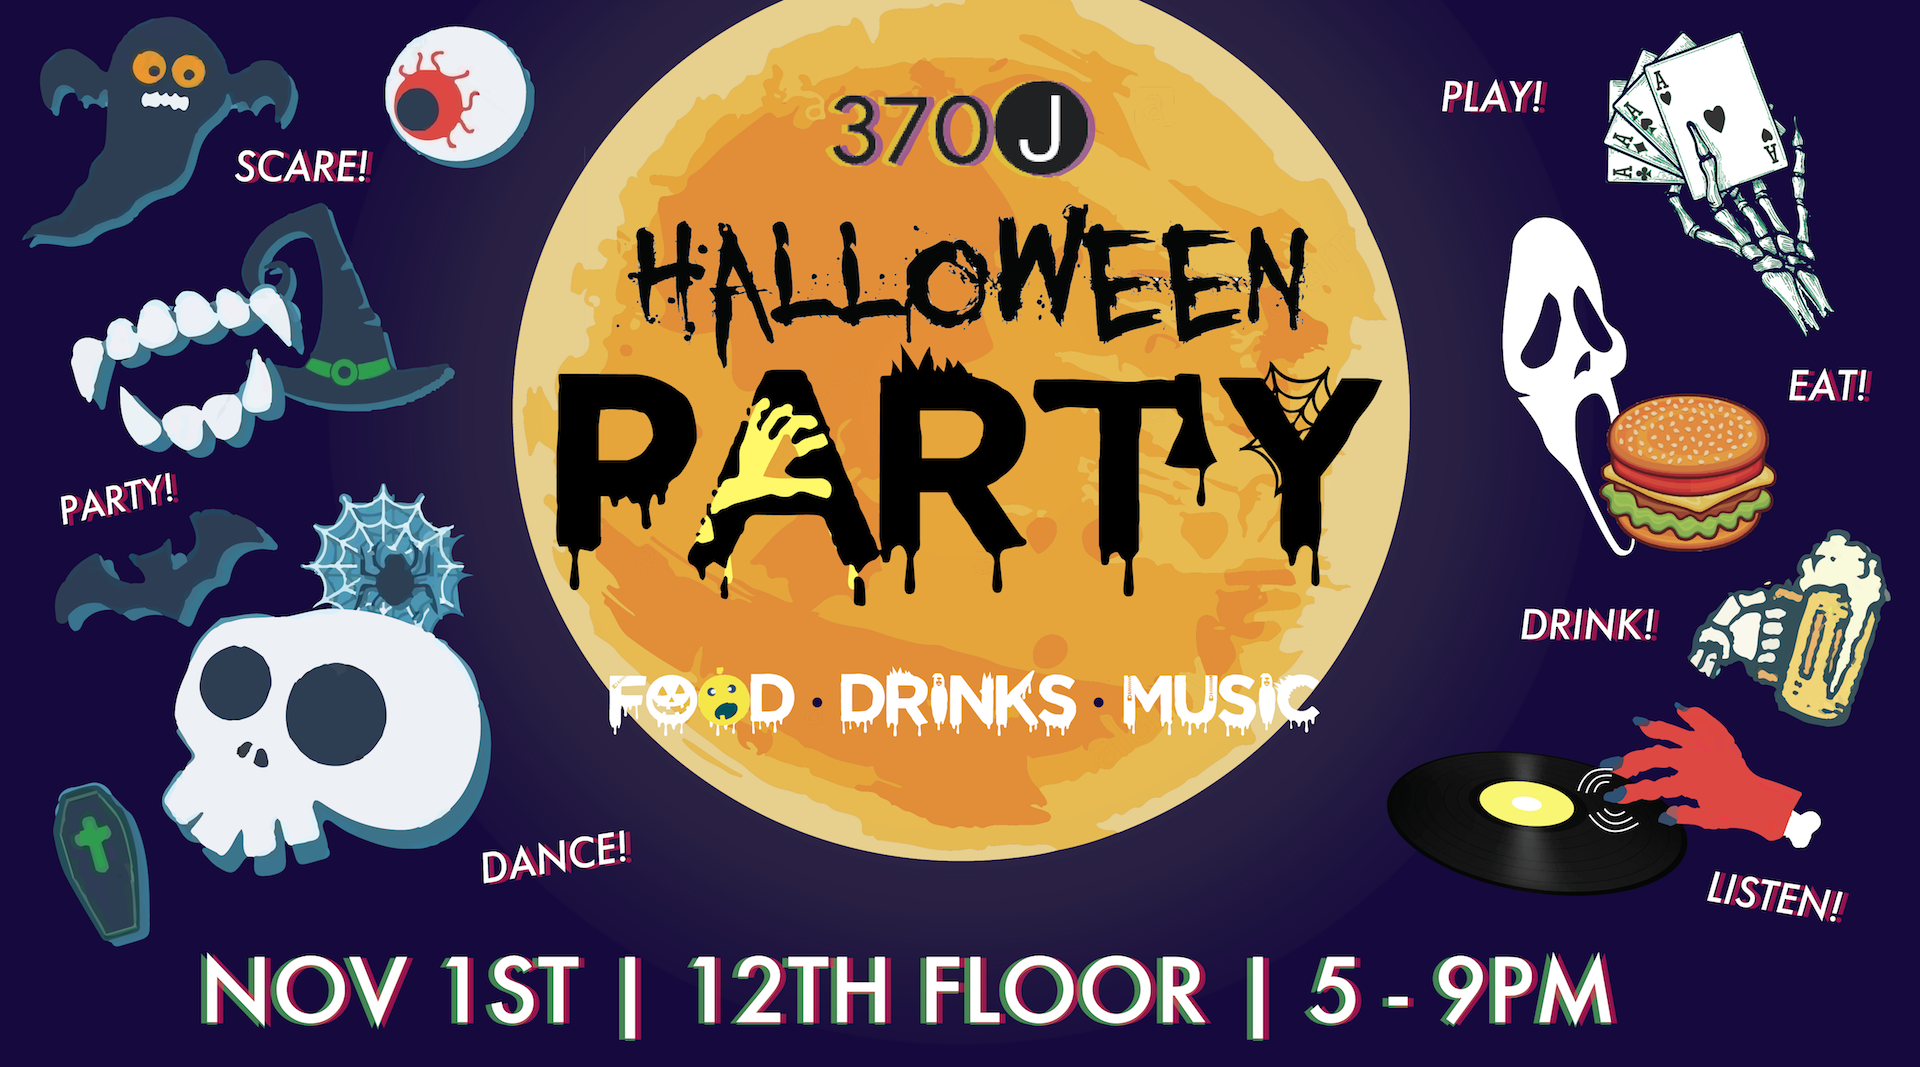 Flyer for 370J Halloween Party